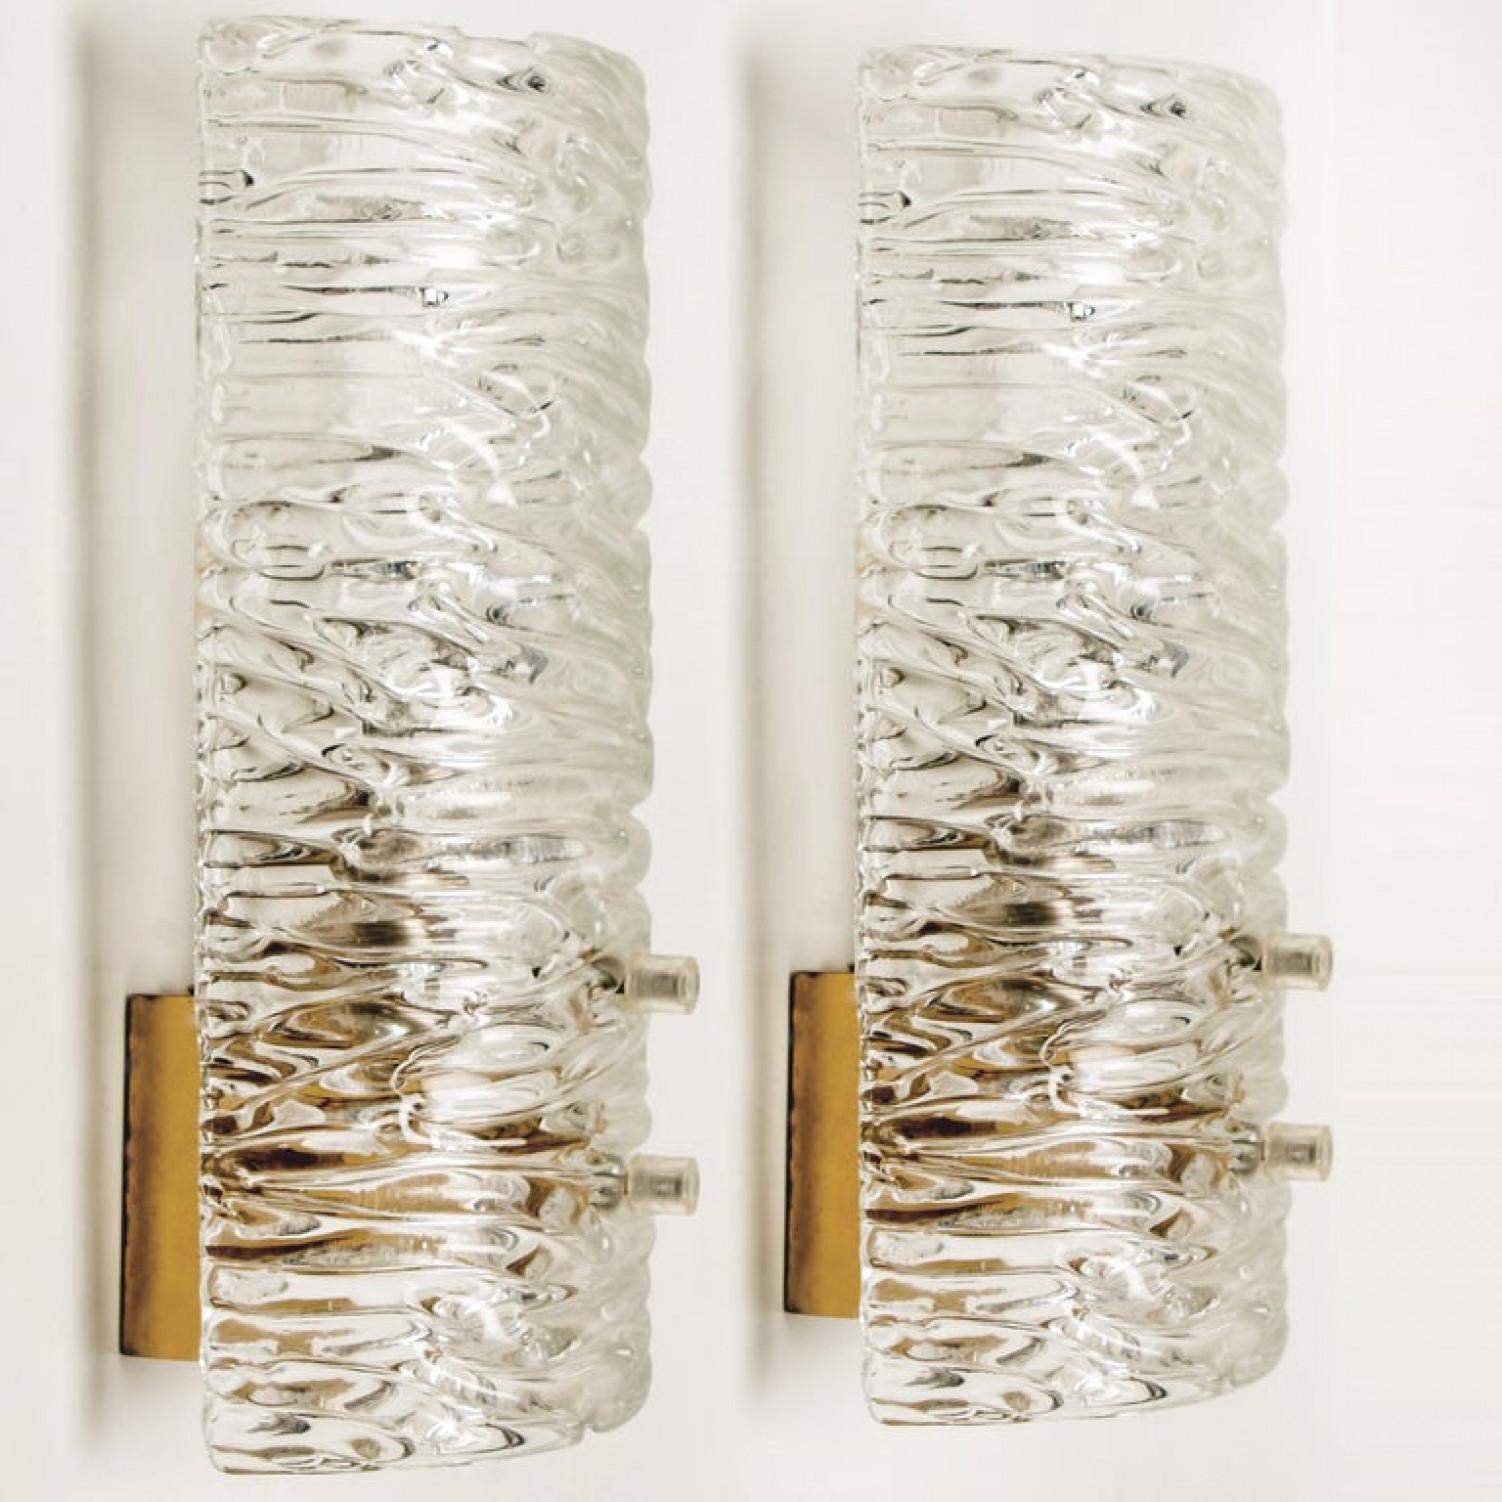 1 of the 12 wall lights by J.T. Kalmar, Vienna, Austria, manufactured in circa 1960. This pair is handmade and high end. Each wall light has a half round wave textured glass shade with a brass back plate,

The wave texture gives a nice diffuse light